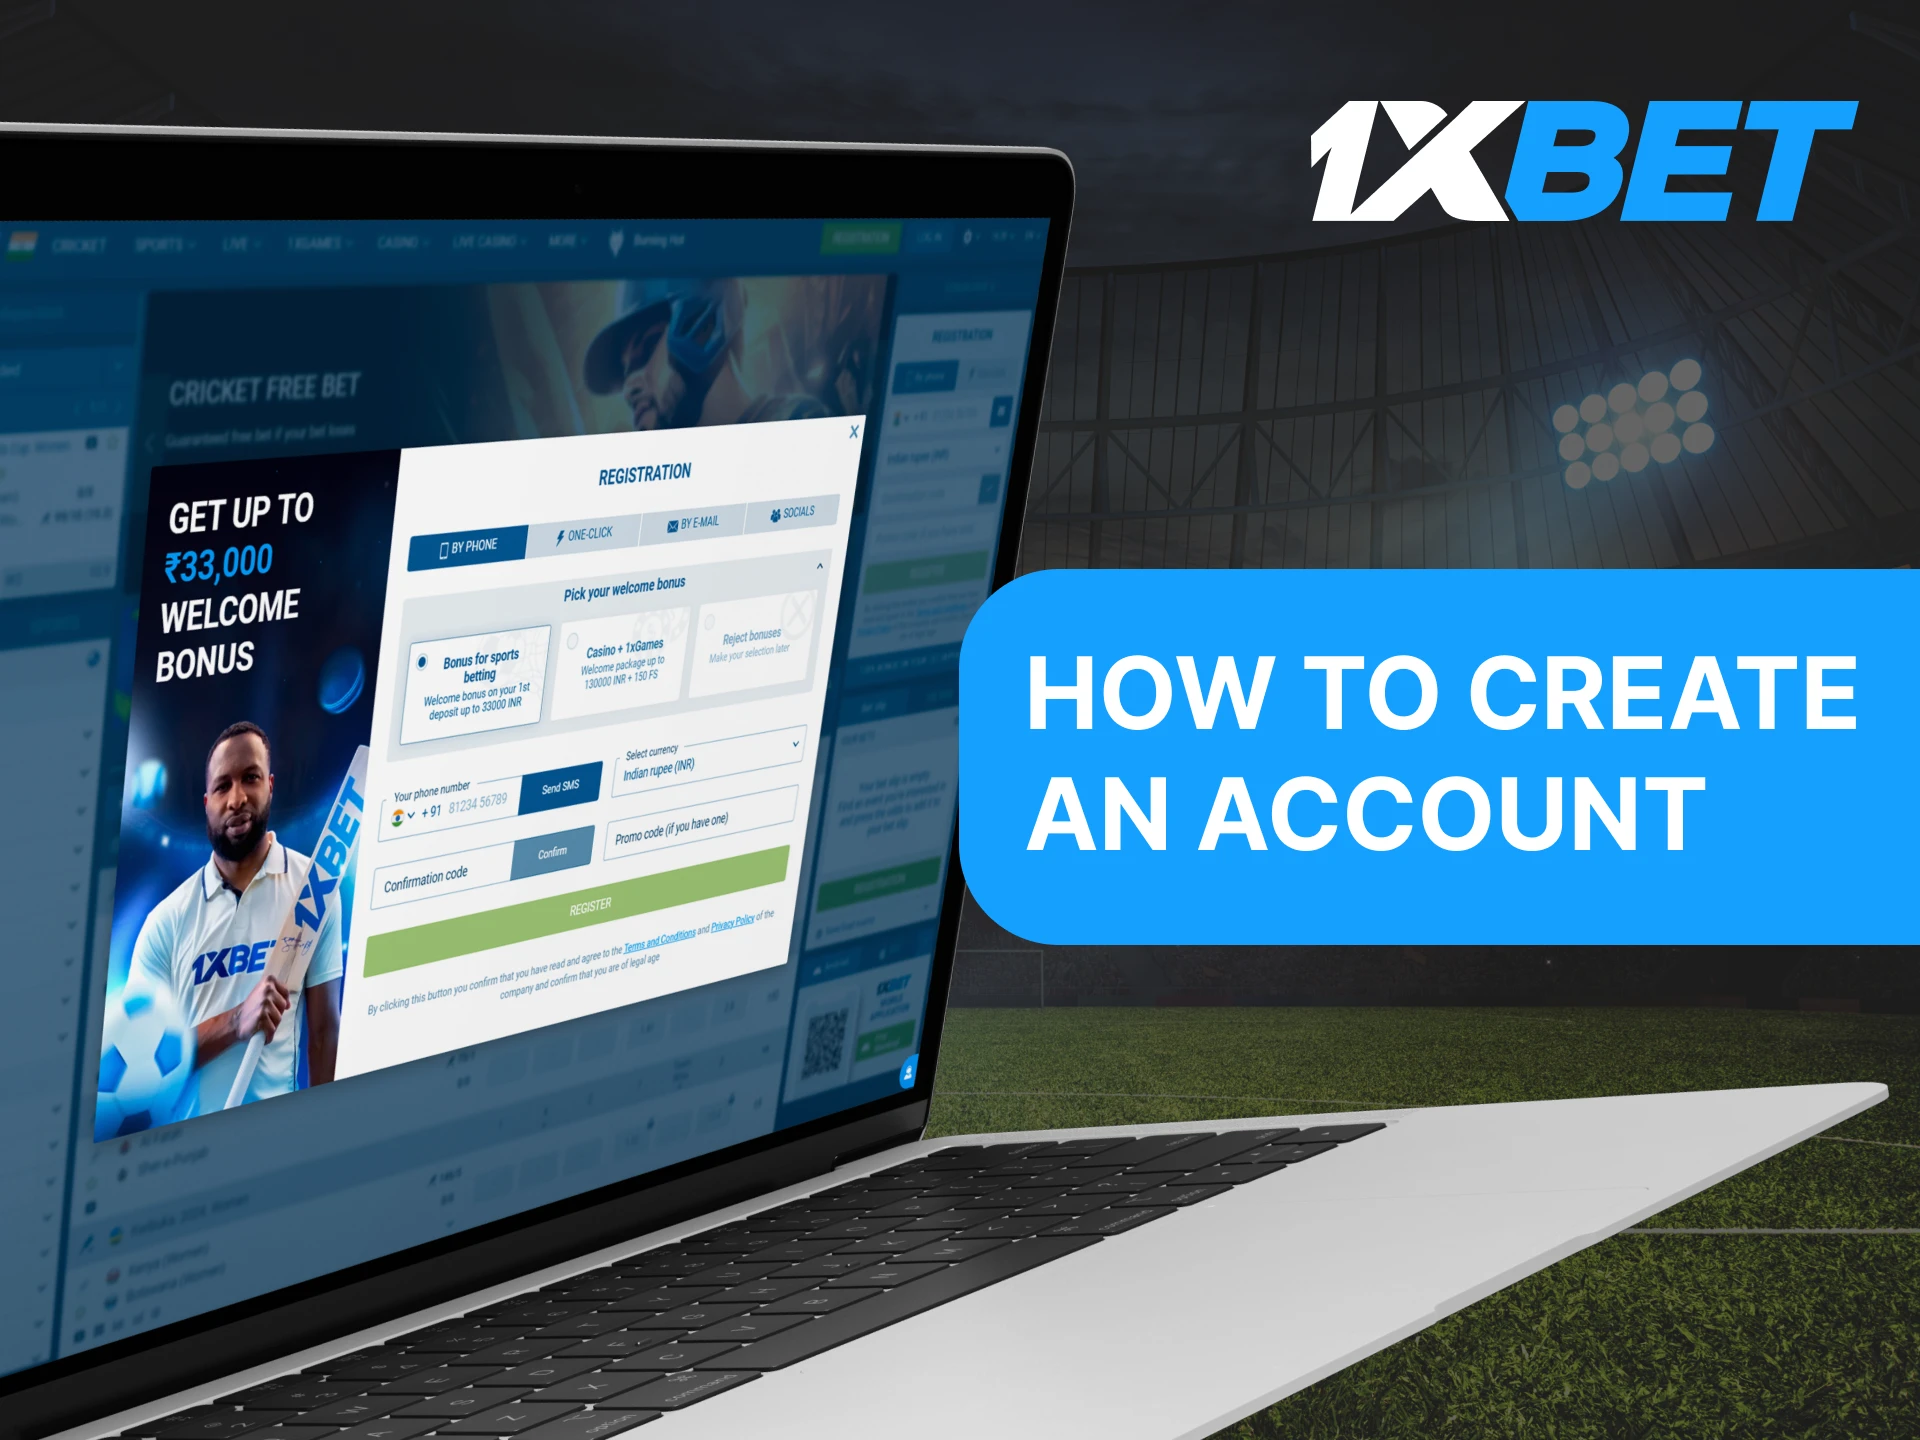 Follow these steps to create a 1xBet account.